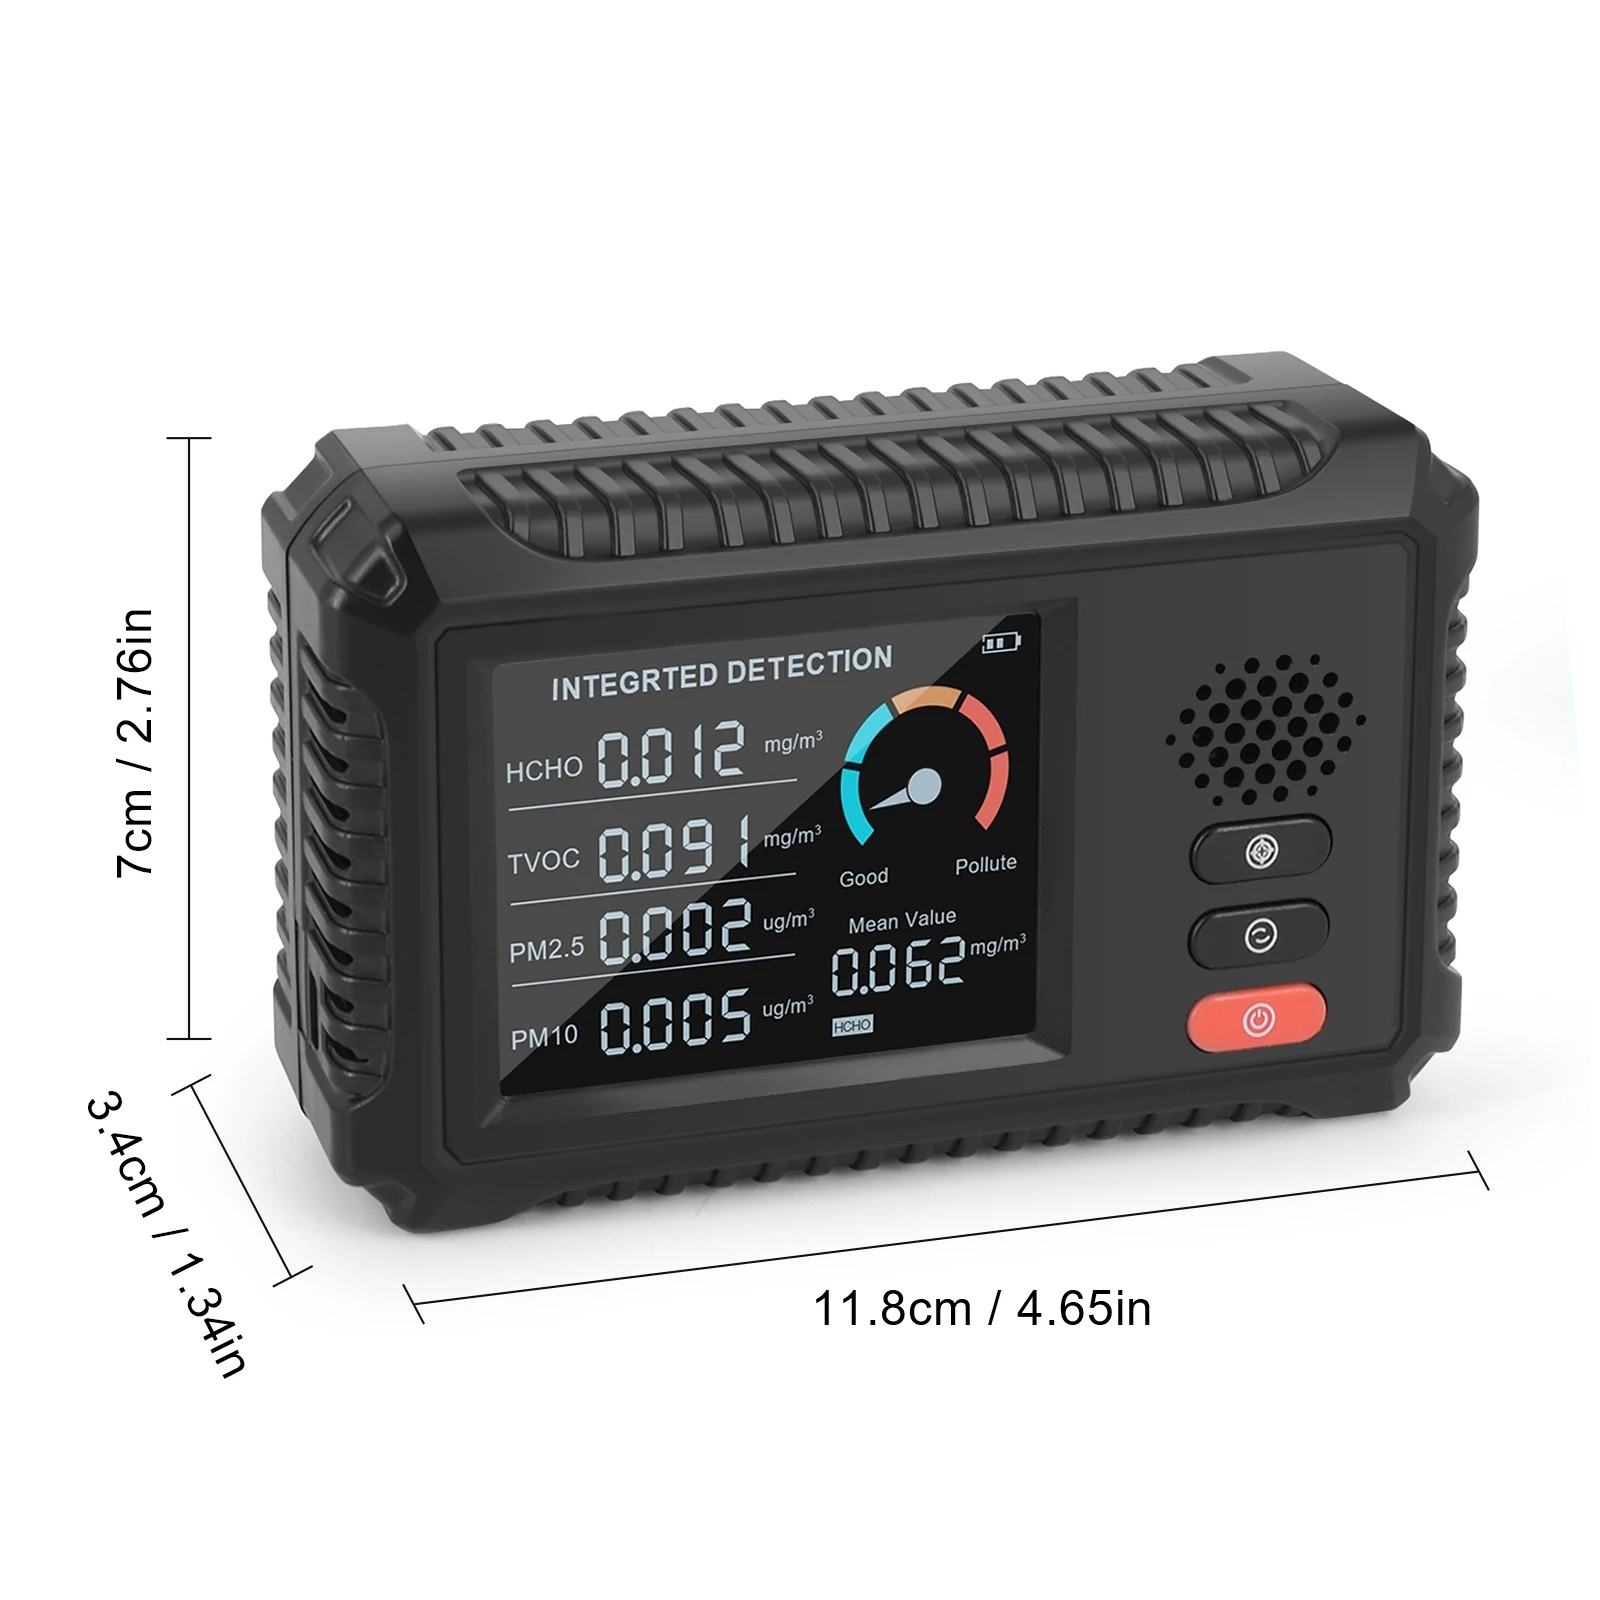 HCHOTVOCPM25PM10-Tester-Real-Time-Data-Monitoring-Multifunctional-Air-Quality-Monitor-Gas-Analyzer-1892301-8